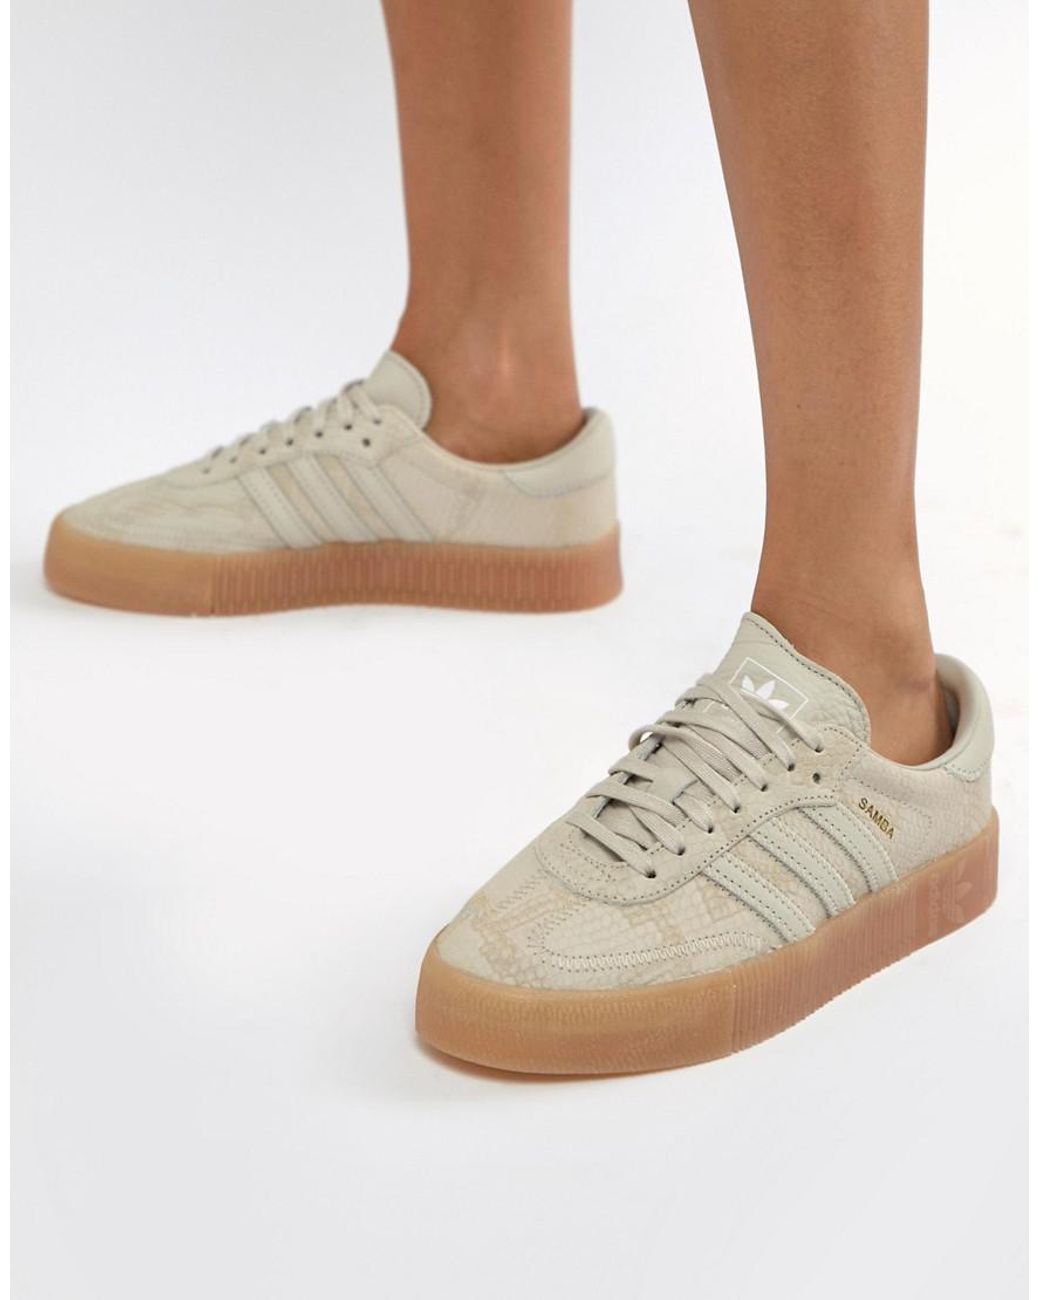 subtraction Snooze hawk adidas Originals Samba Rose Sneakers In Tan With Gum Sole in Natural | Lyst